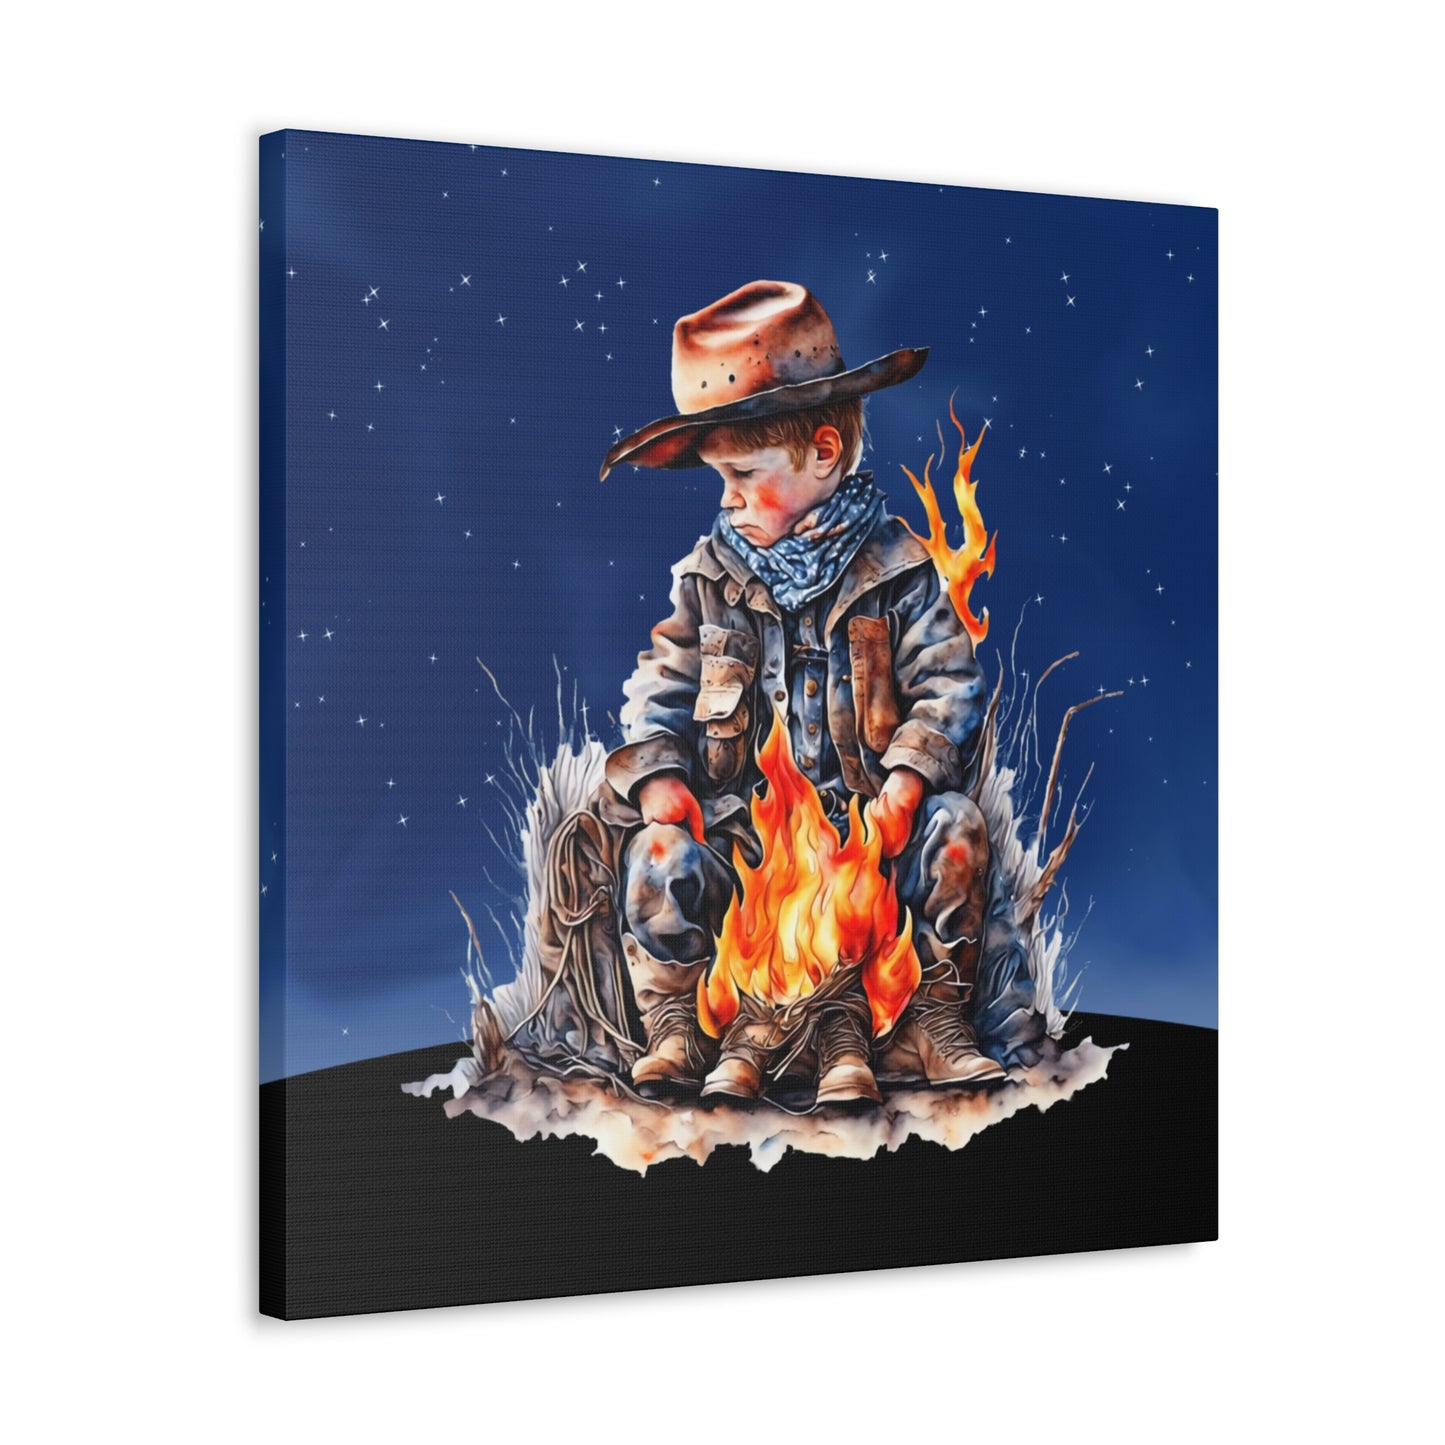 "Starry Night Cowboy" Wall Art - Weave Got Gifts - Unique Gifts You Won’t Find Anywhere Else!